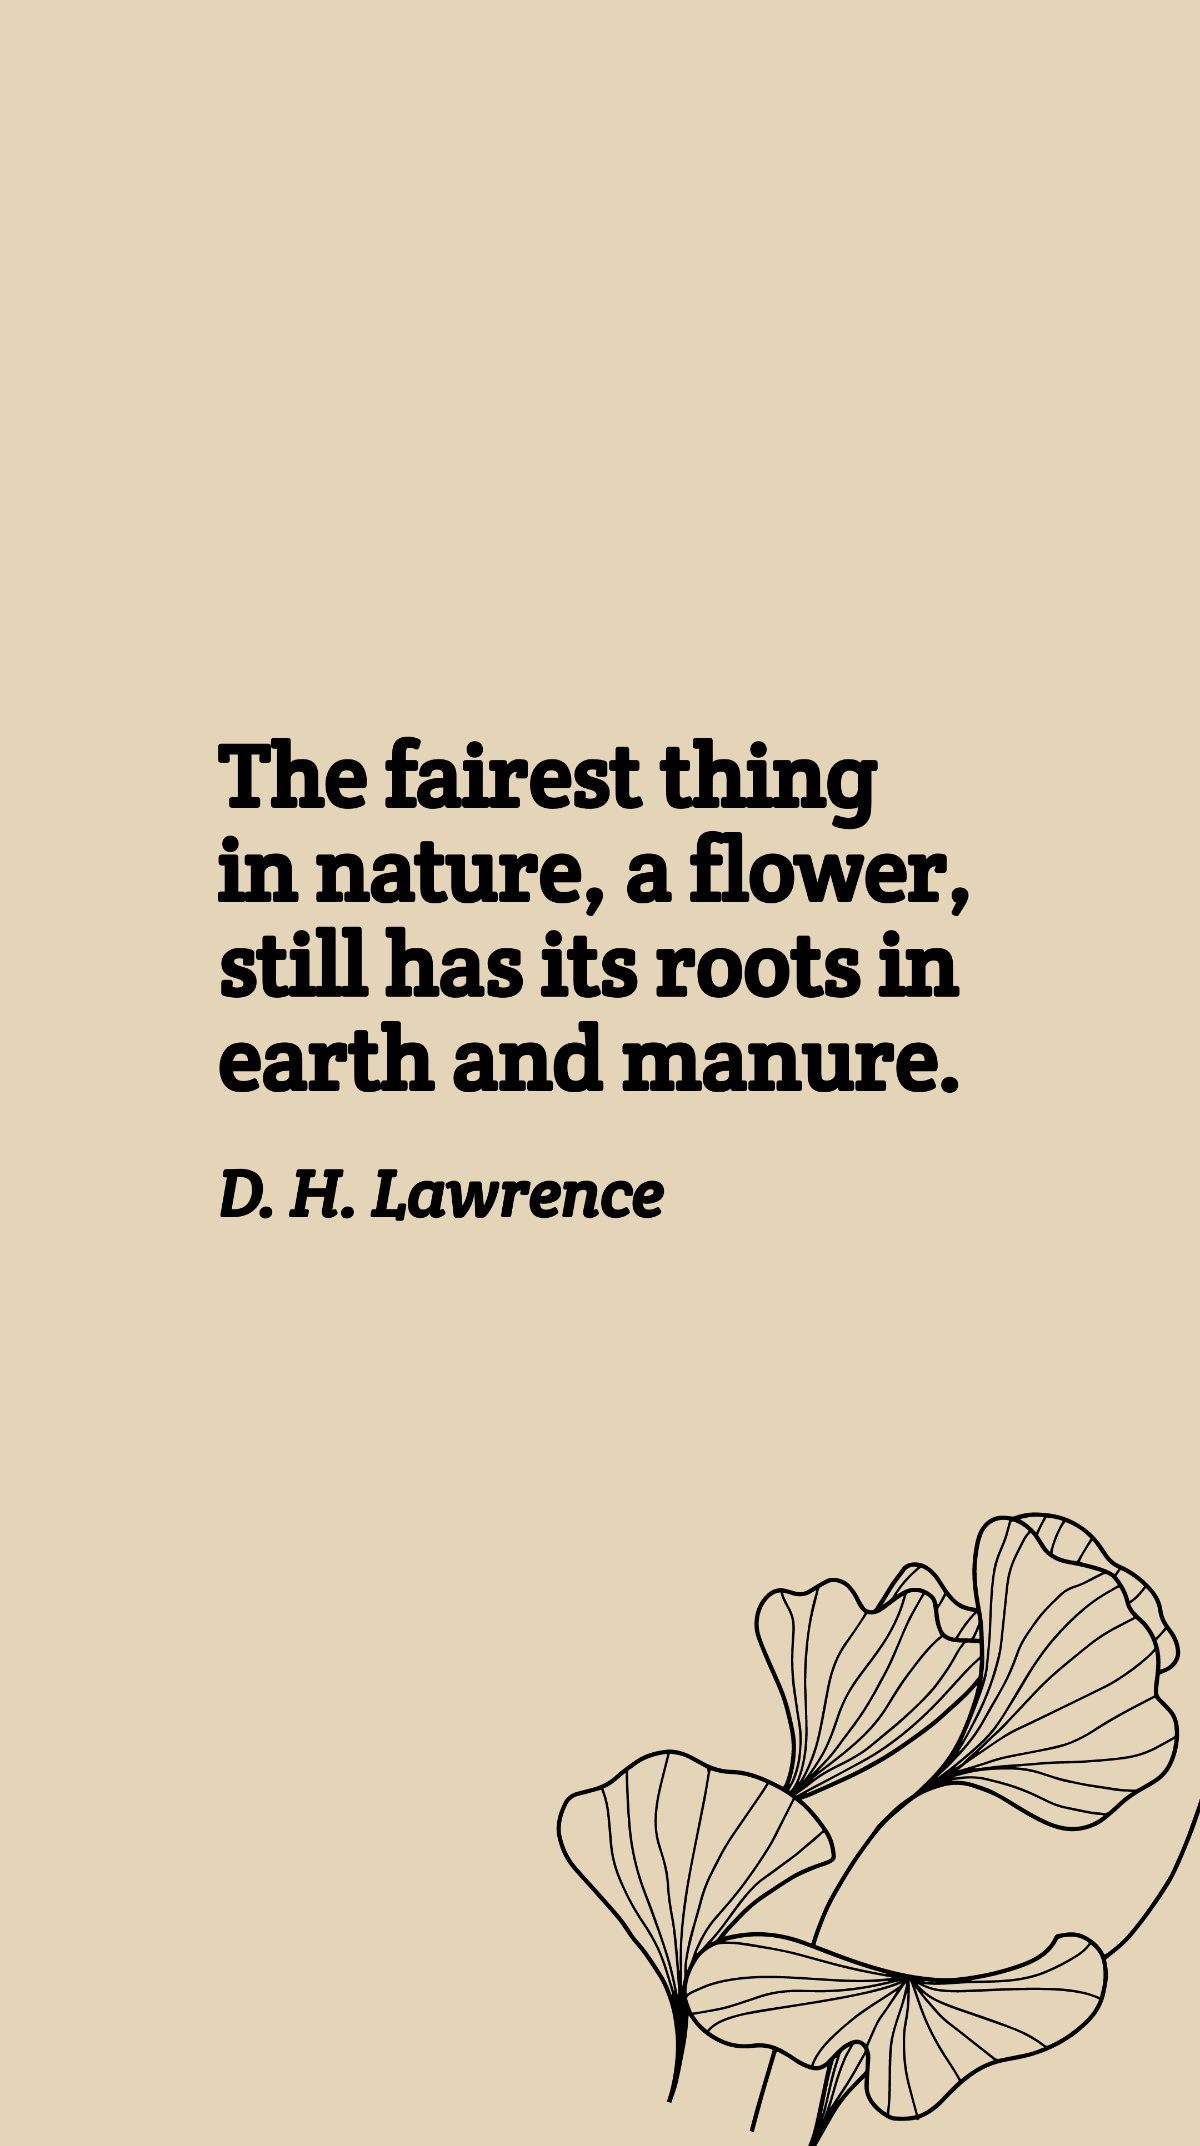 D. H. Lawrence - The fairest thing in nature, a flower, still has its roots in earth and manure. Template